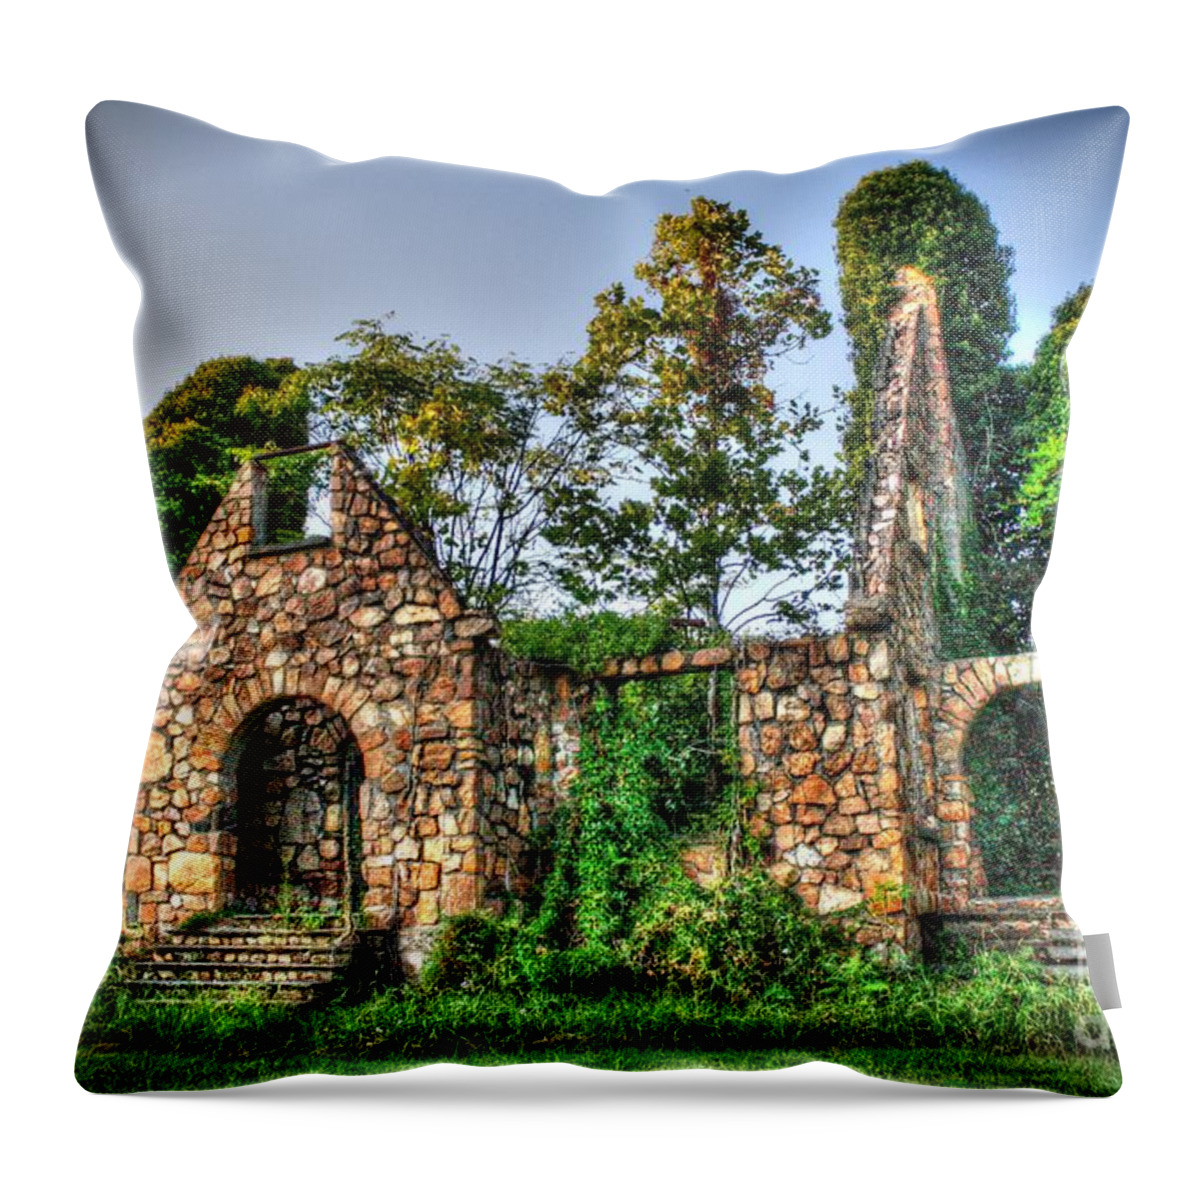 Decay Throw Pillow featuring the digital art The Olde Stone Church by Dan Stone